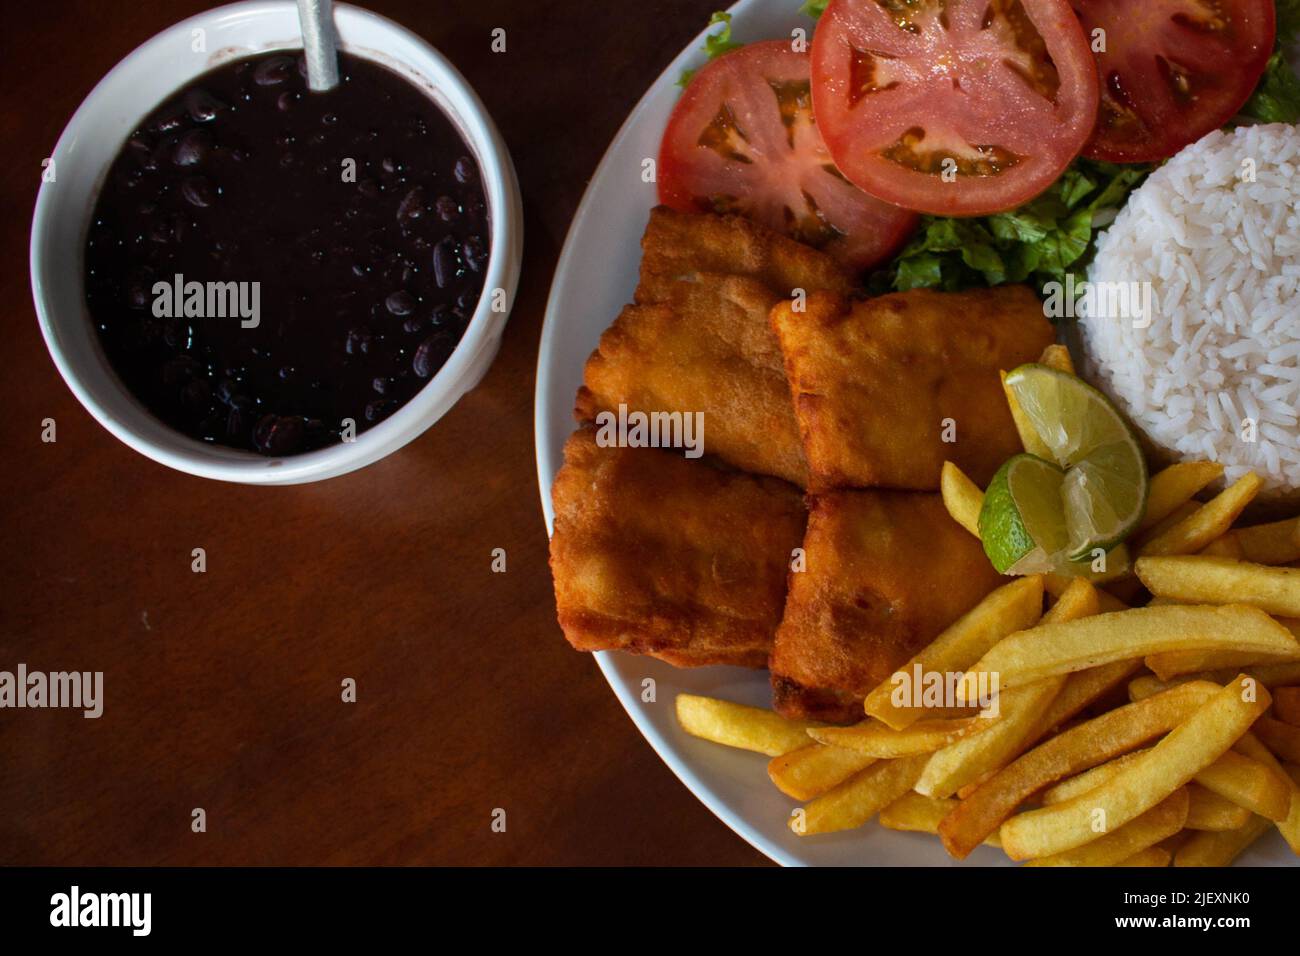 Close-up of typical Brazilian combo plate, rice, fried fish, french fries, salad and feijoada. Stock Photo